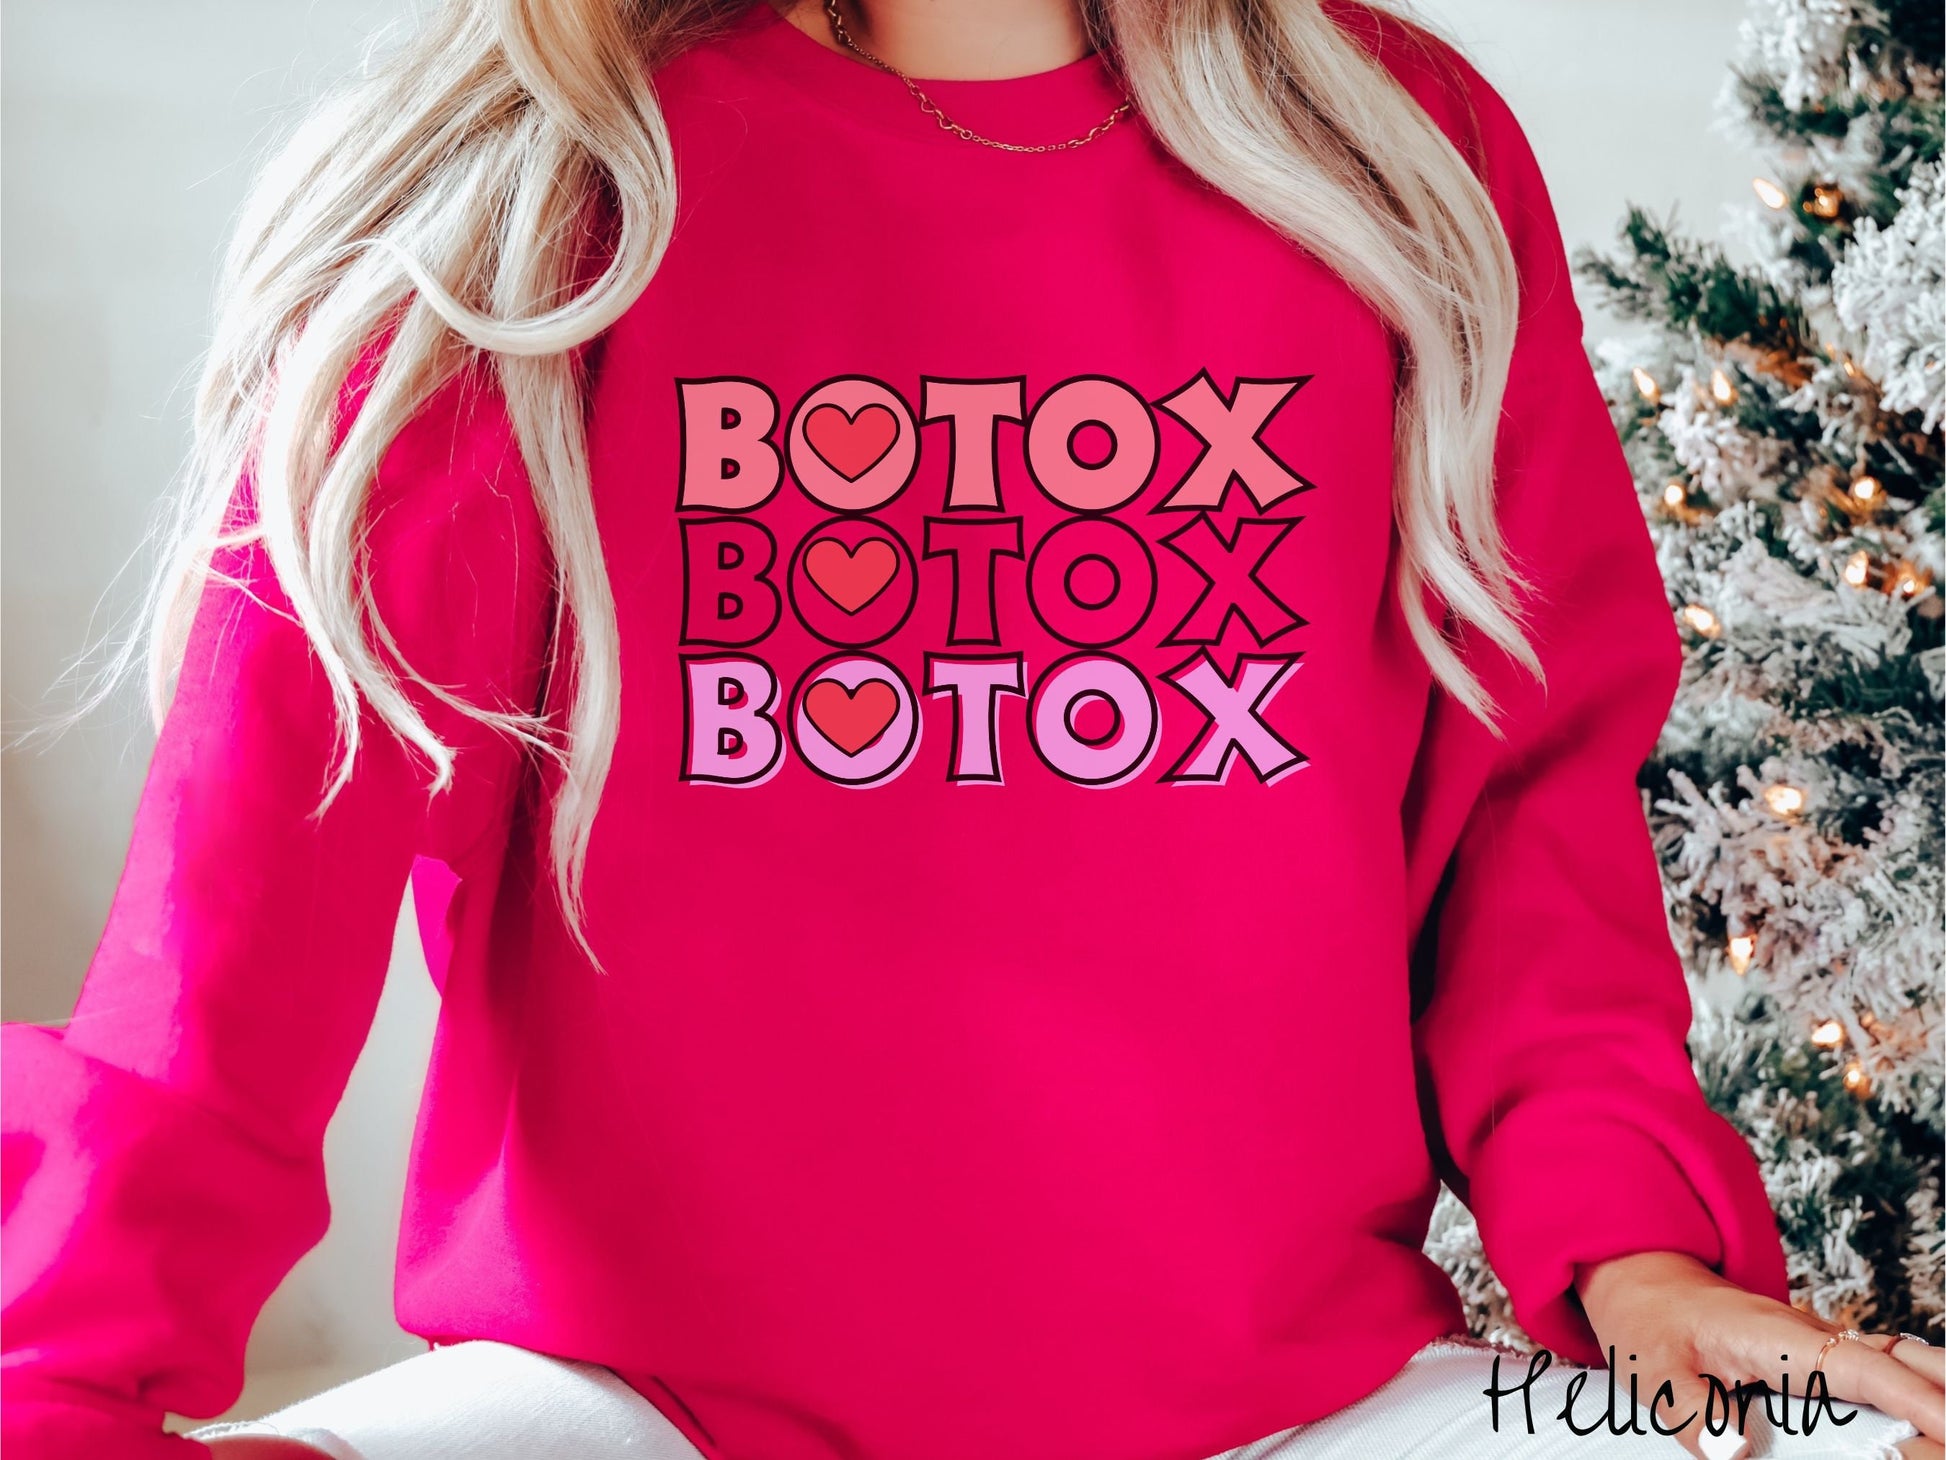 A woman wearing a cute heliconia colored sweatshirt with the word Botox listed three times in different shades of pink and red, with red hearts inside the first letter O in Botox.